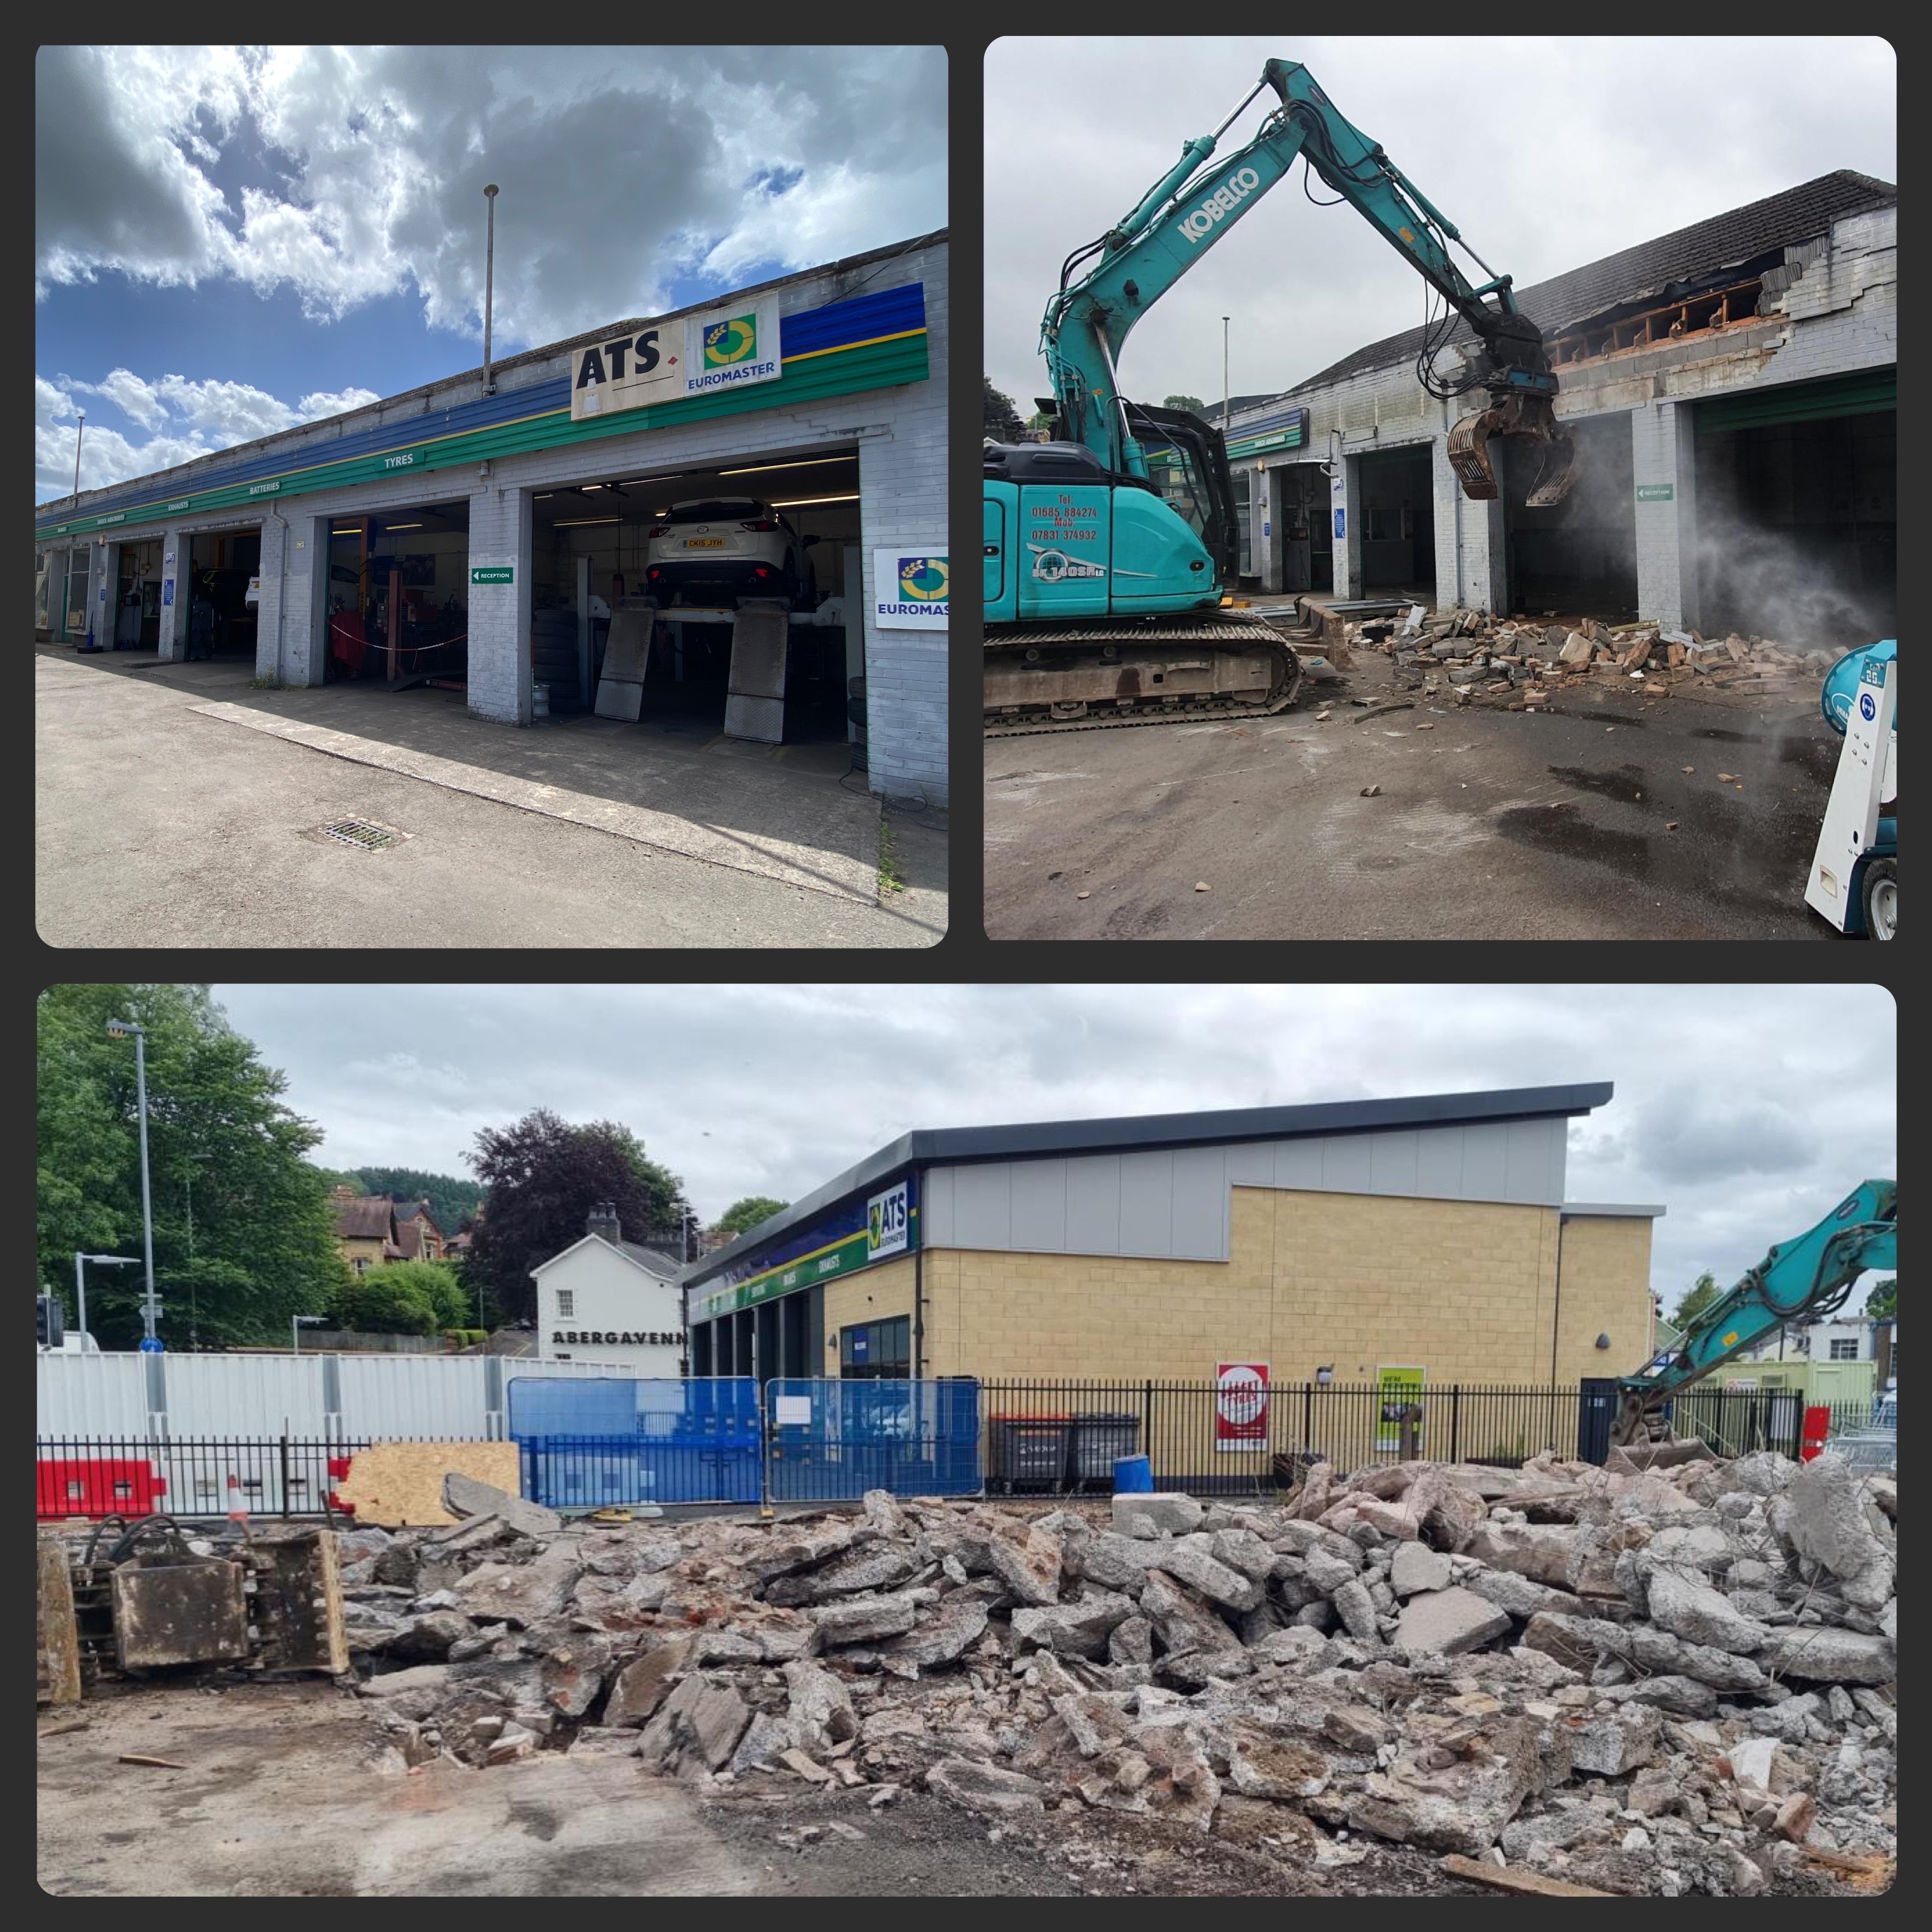 Aldi extension phase two - demolition of the existing ATS